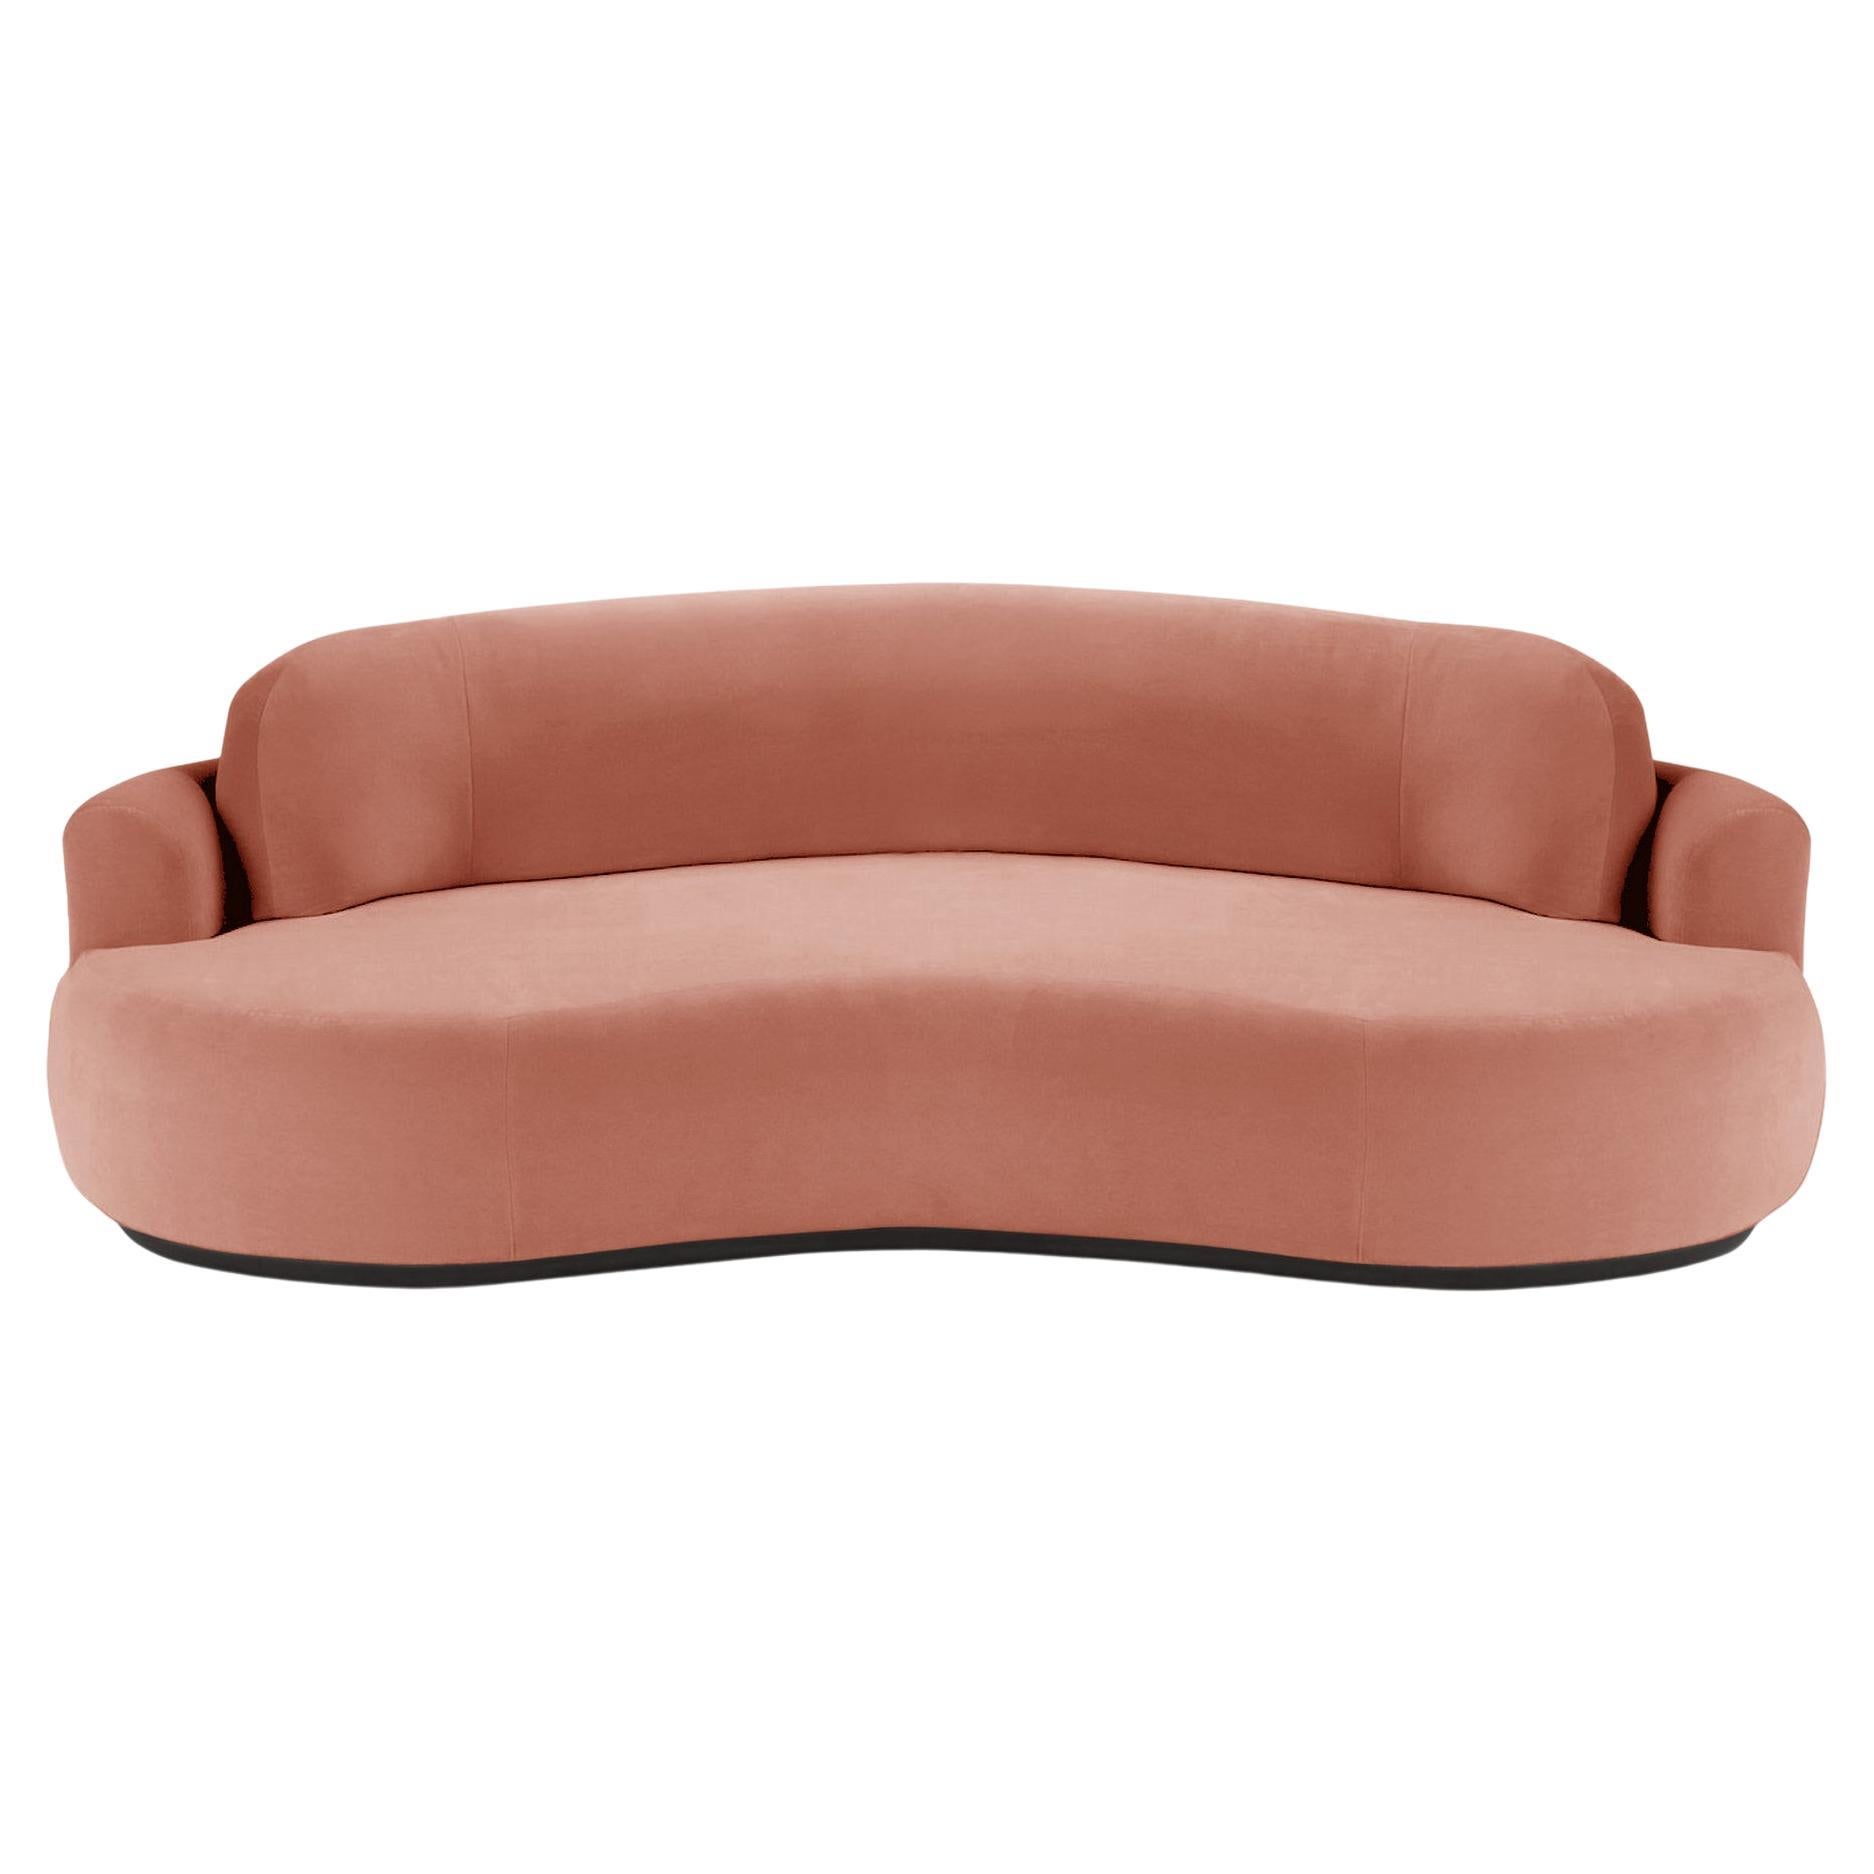 Naked Round Sofa, Large with Beech Ash-056-5 and Paris Brick For Sale